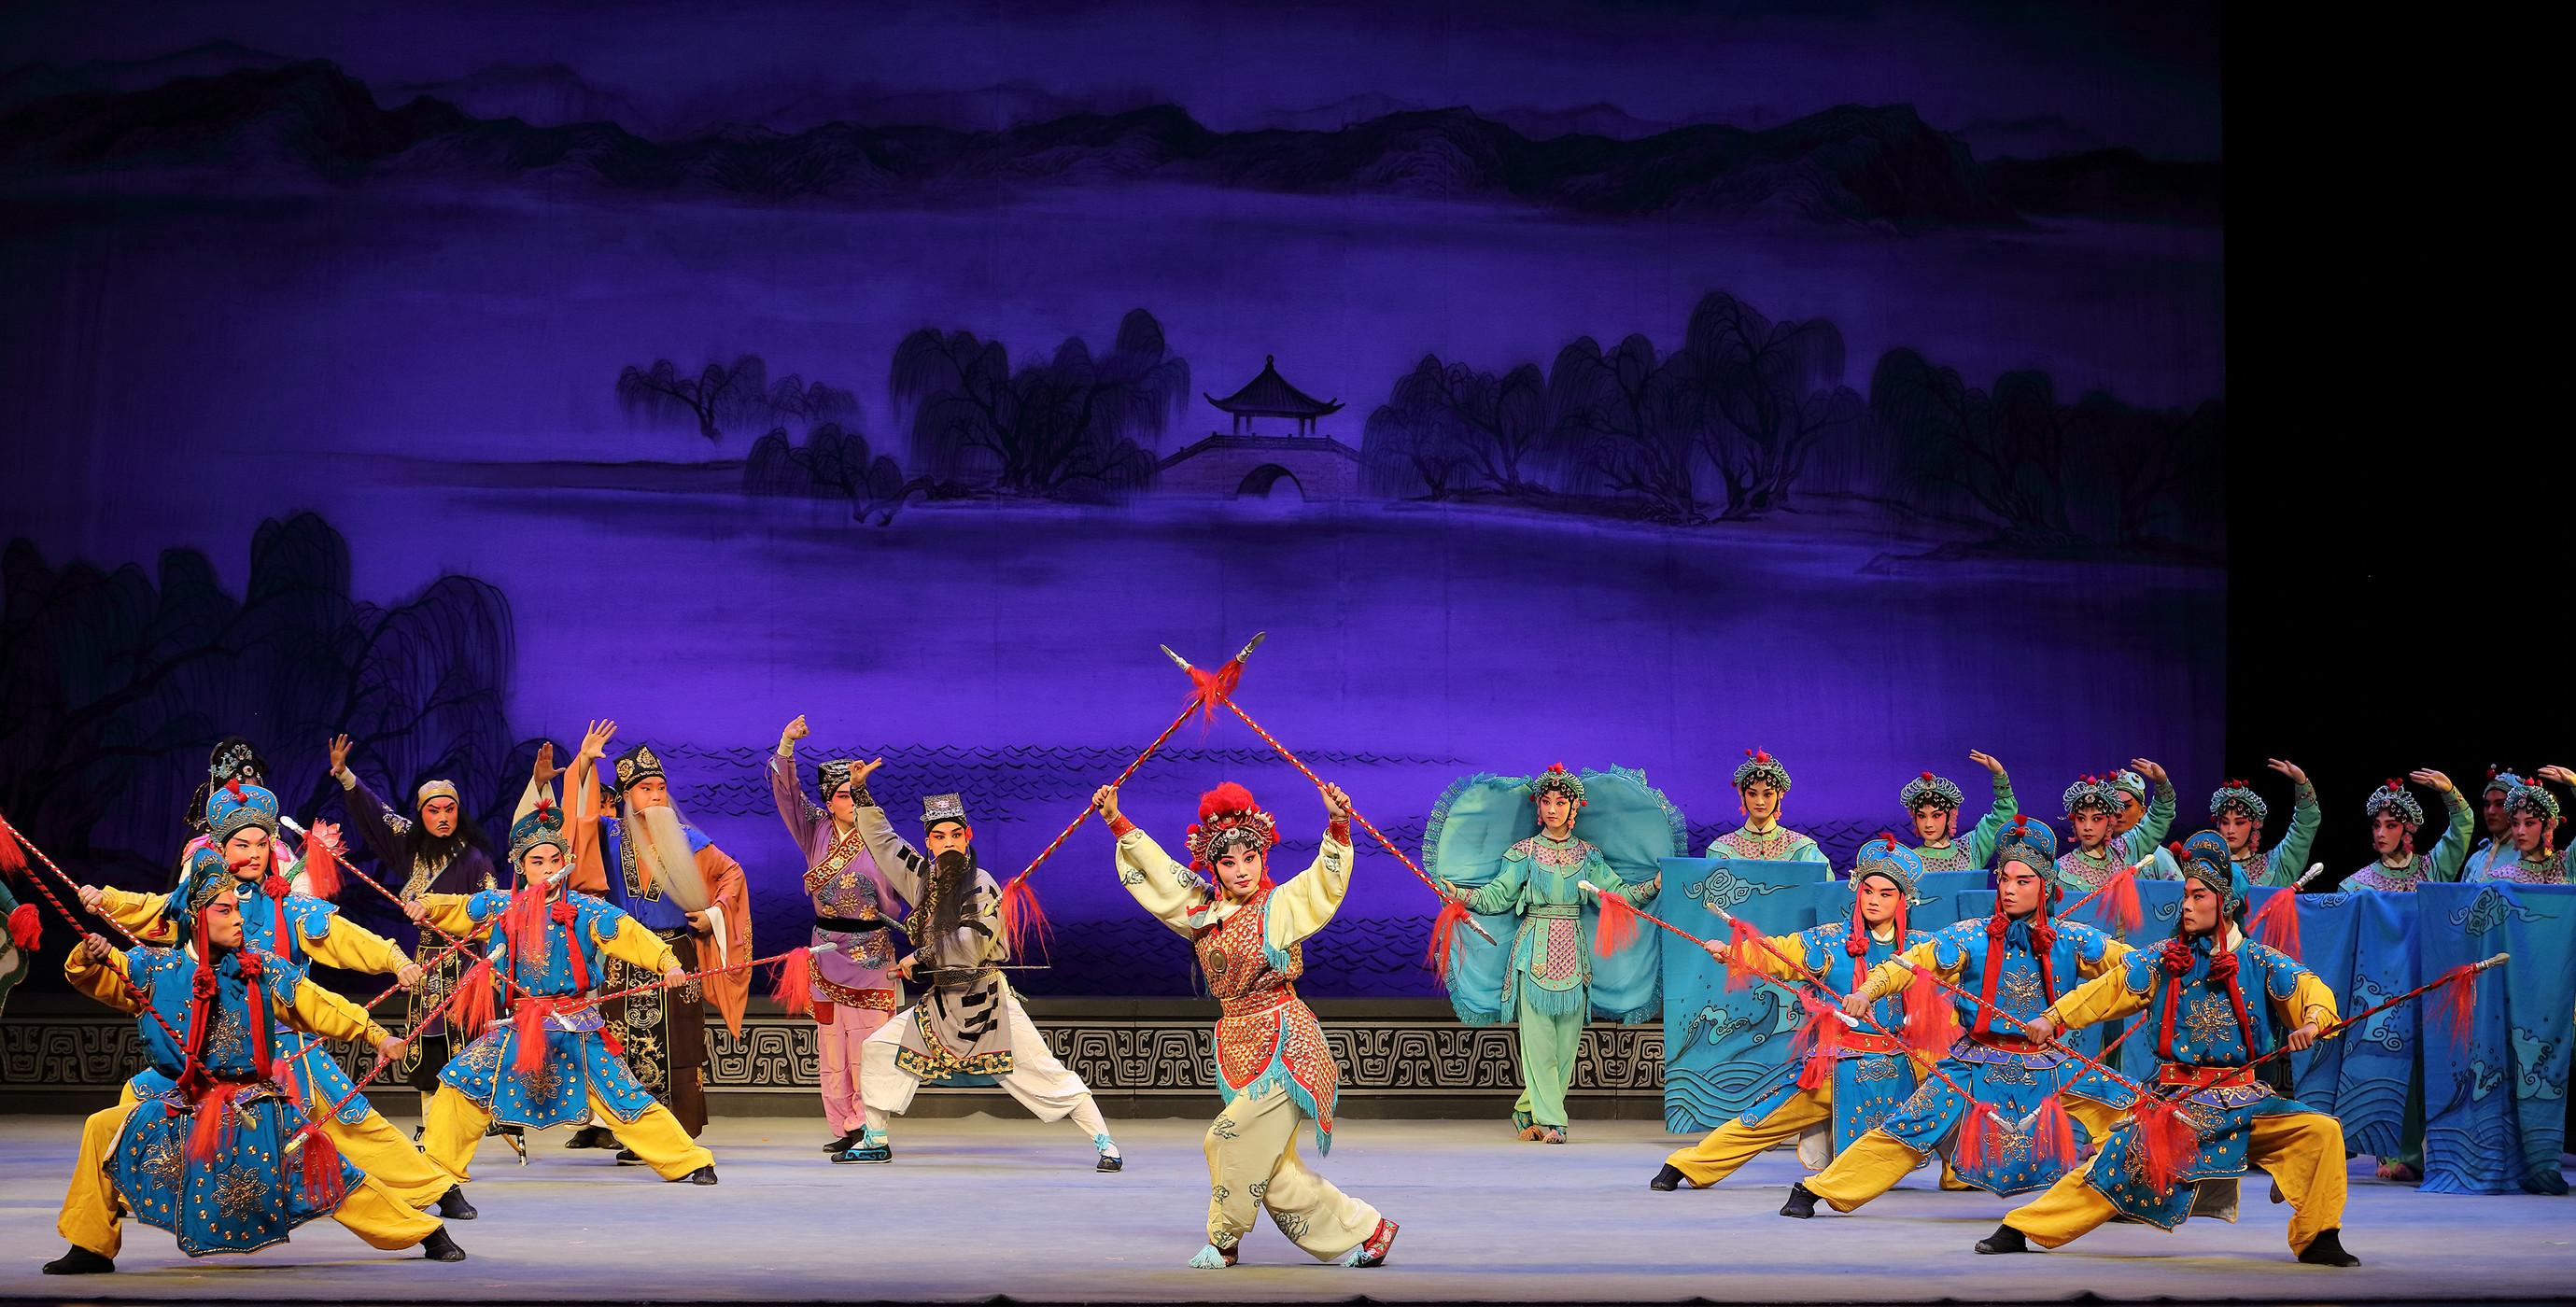 The Leisure and Cultural Services Department has invited the Zhejiang Wu Opera Research Centre to return to Hong Kong for three stunning performances in late July at this year's Chinese Opera Festival. Photo shows a scene from Excerpt "The Eight Immortals Crossing the Sea".